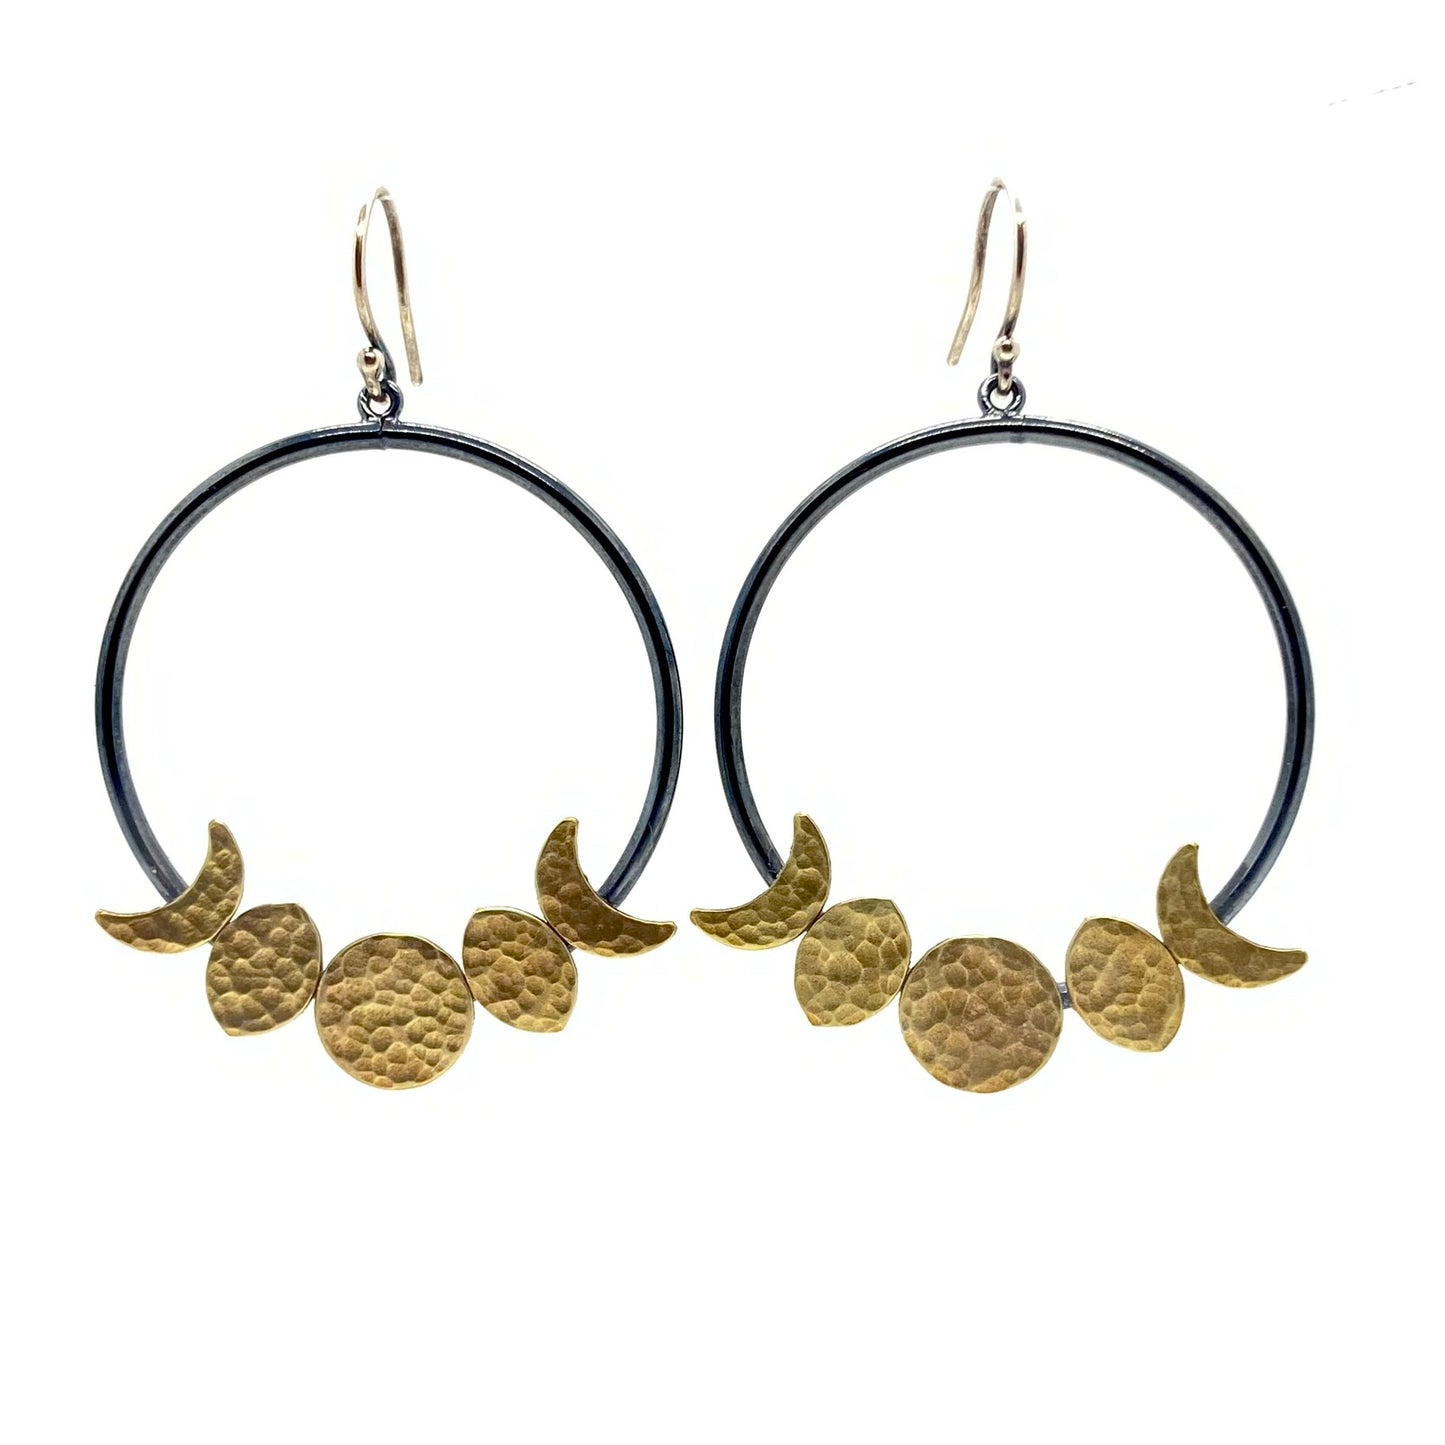 Moon Phase Hoop Earrings in Oxidized Sterling Silver and Brass